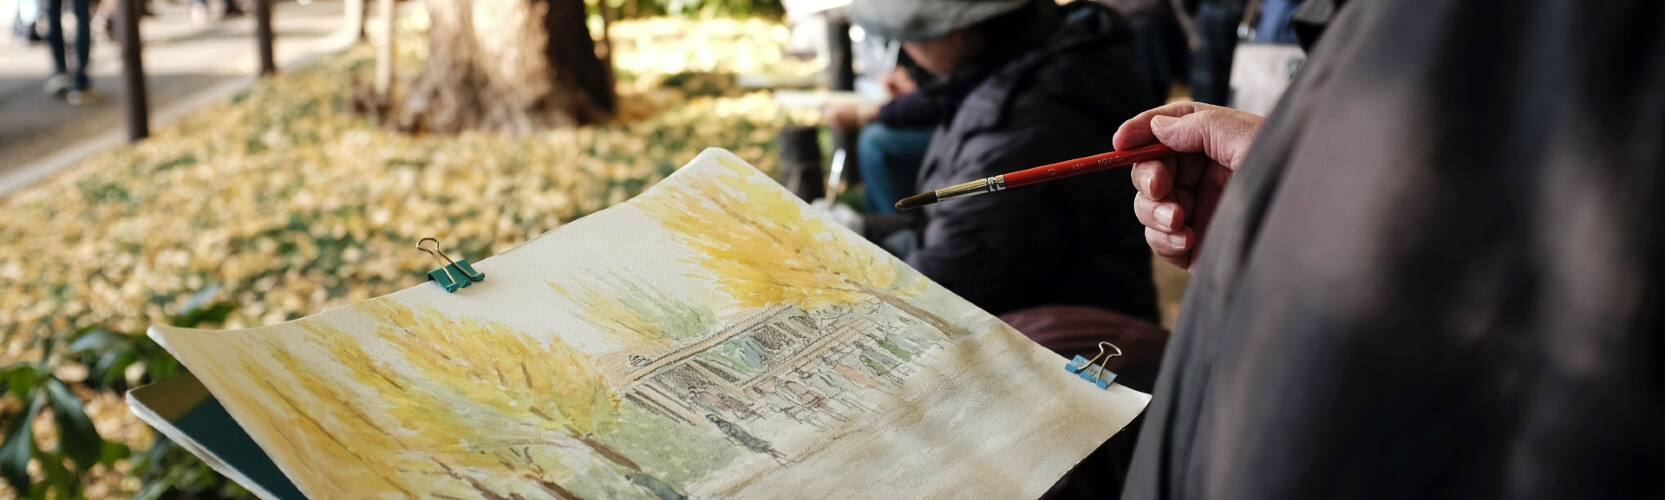 People painting in the park